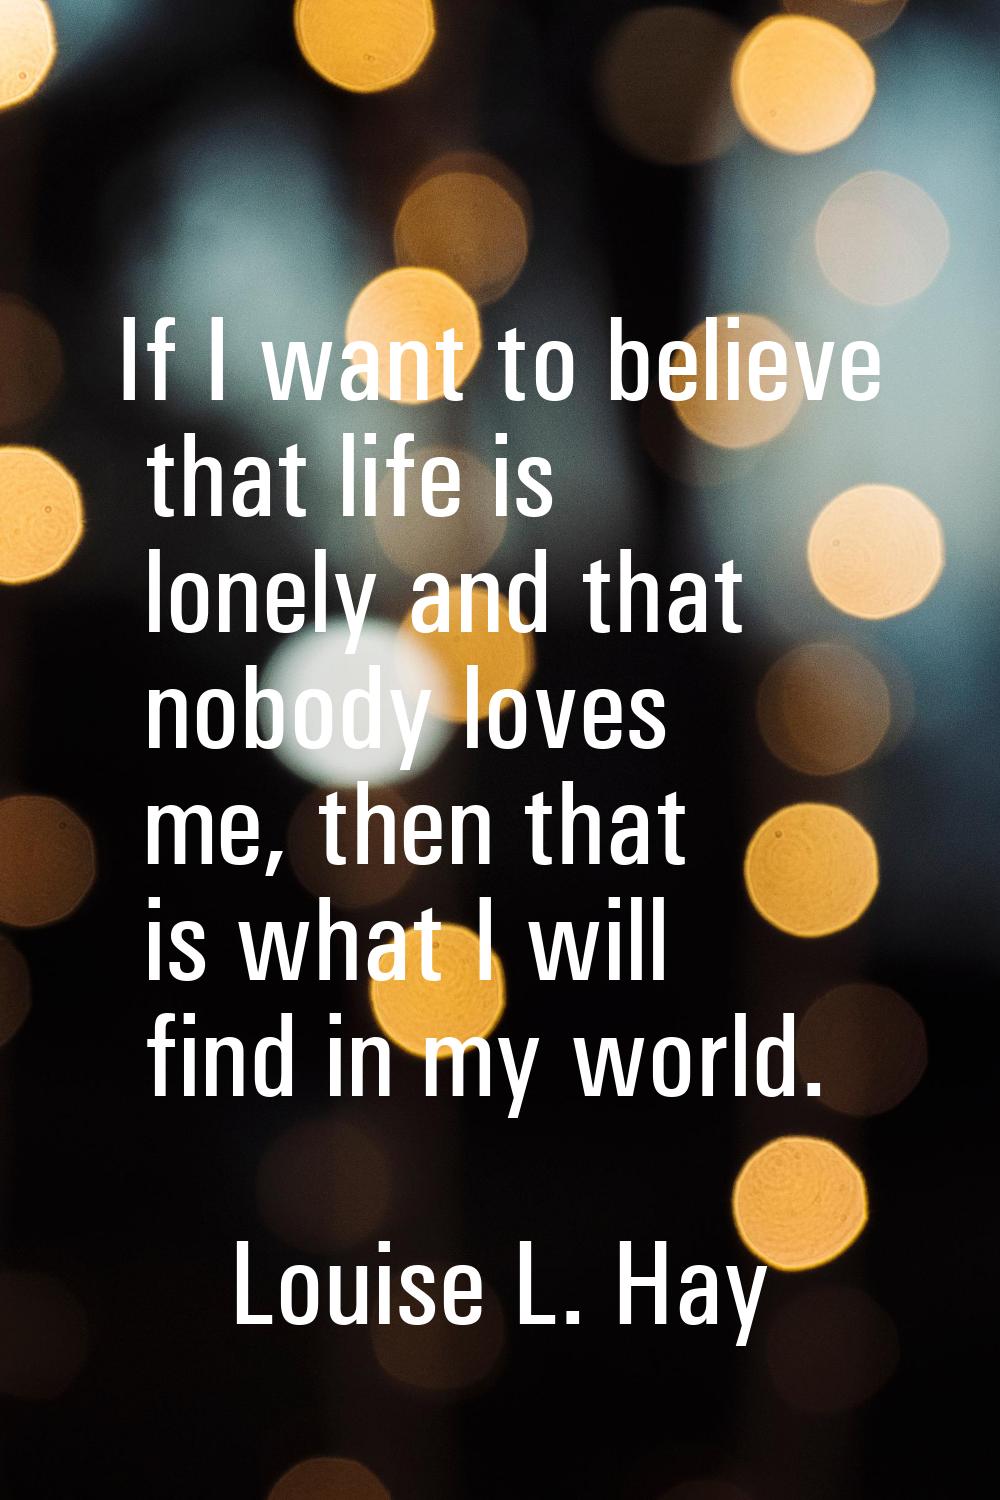 If I want to believe that life is lonely and that nobody loves me, then that is what I will find in